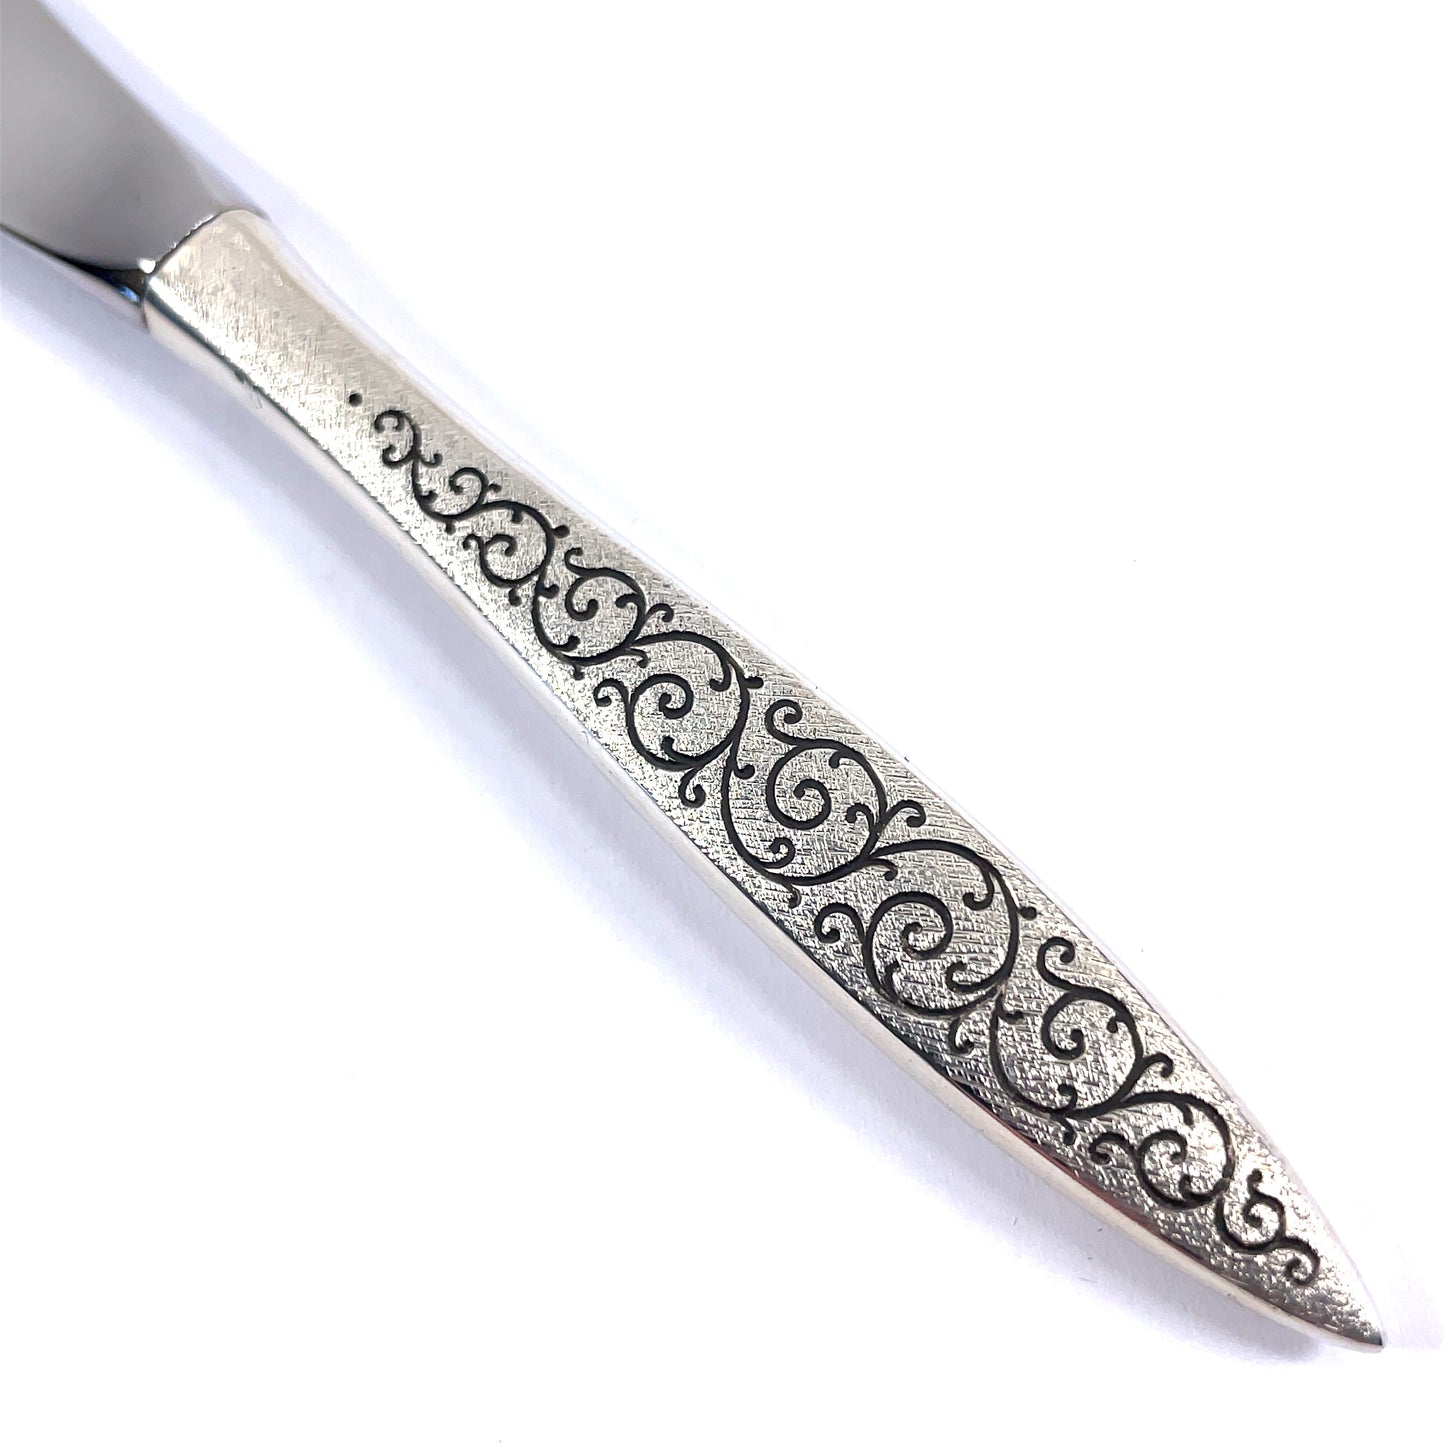 Spanish Lace by Wallace Sterling Silver Master Butter Knife